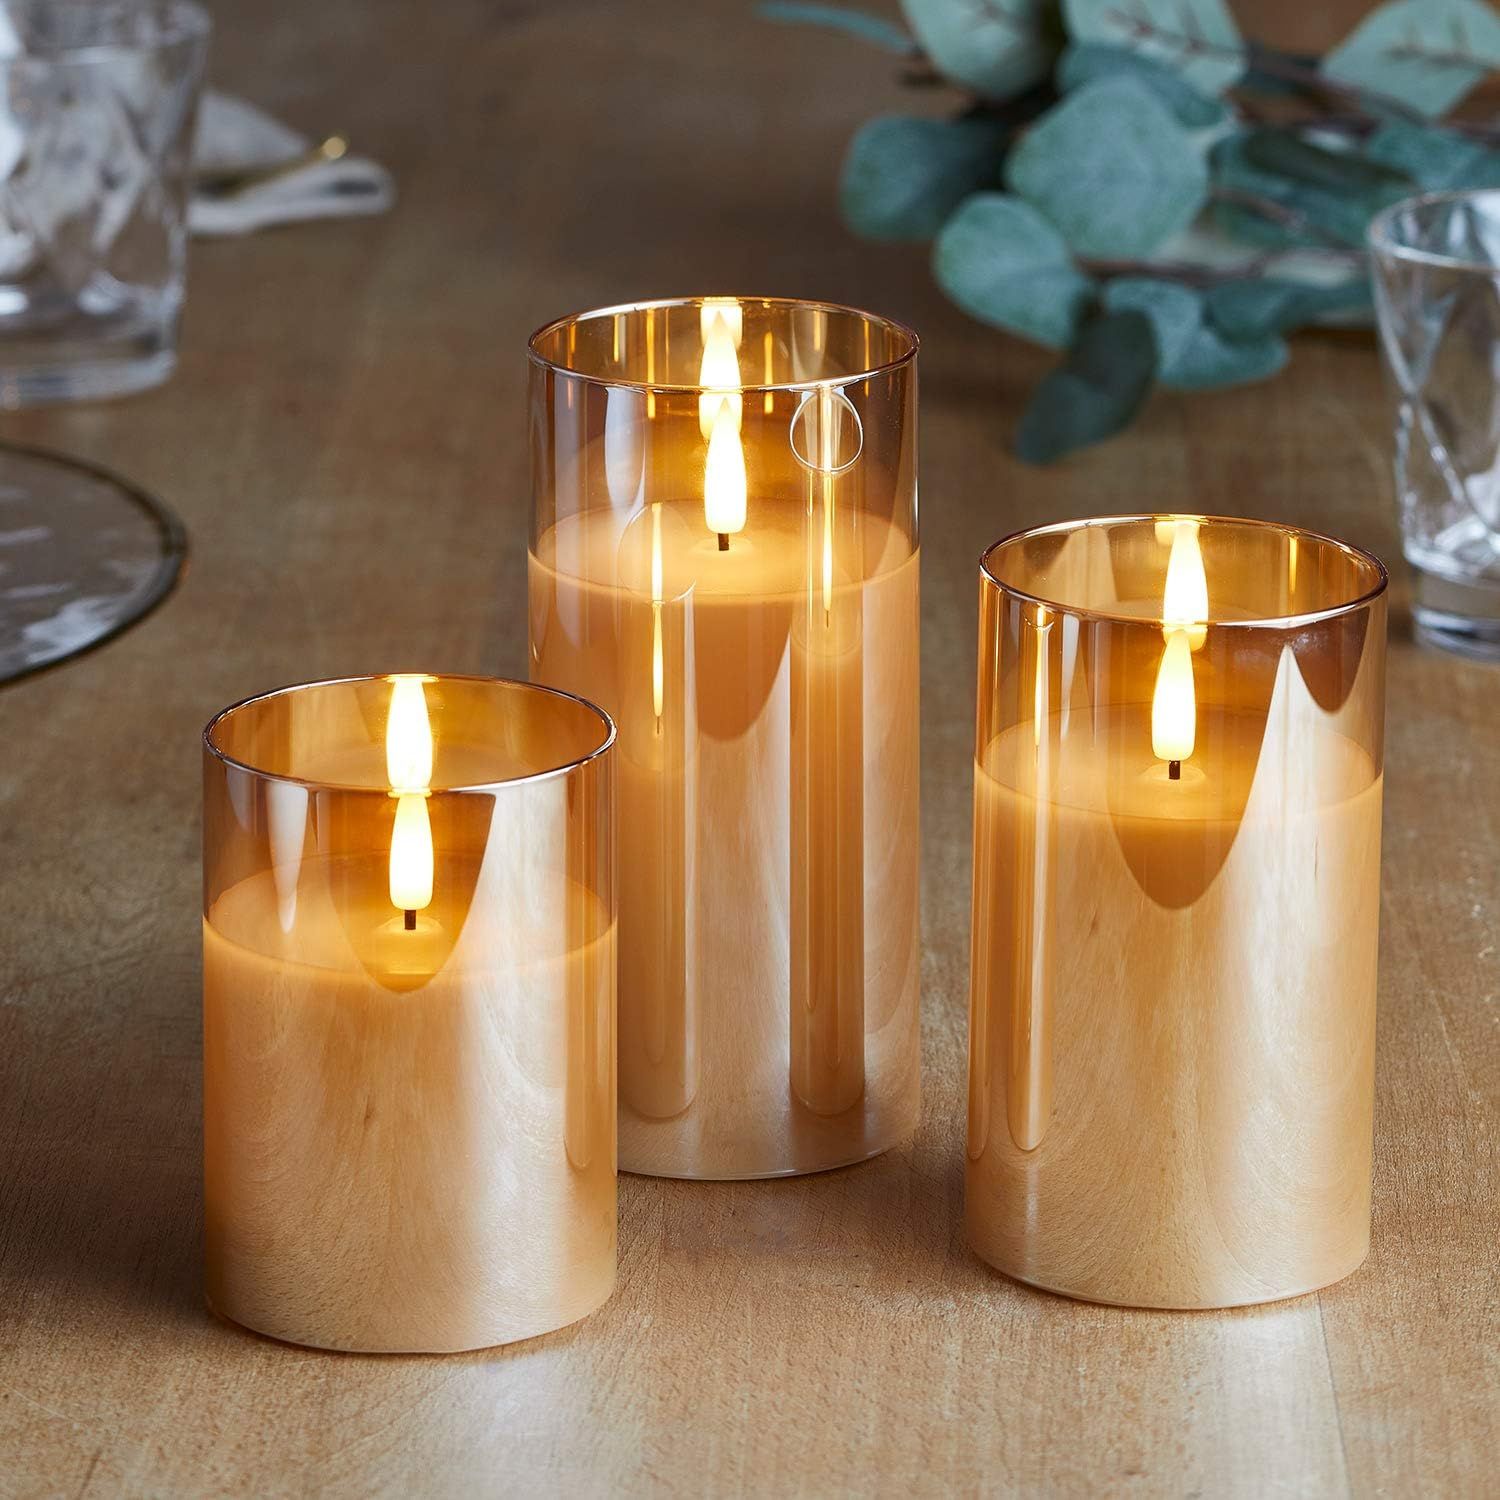 Lights4fun, Inc. Set of 3 TruGlow Gold Glass Flameless LED Battery Operated Pillar Candles with Remo | Amazon (US)